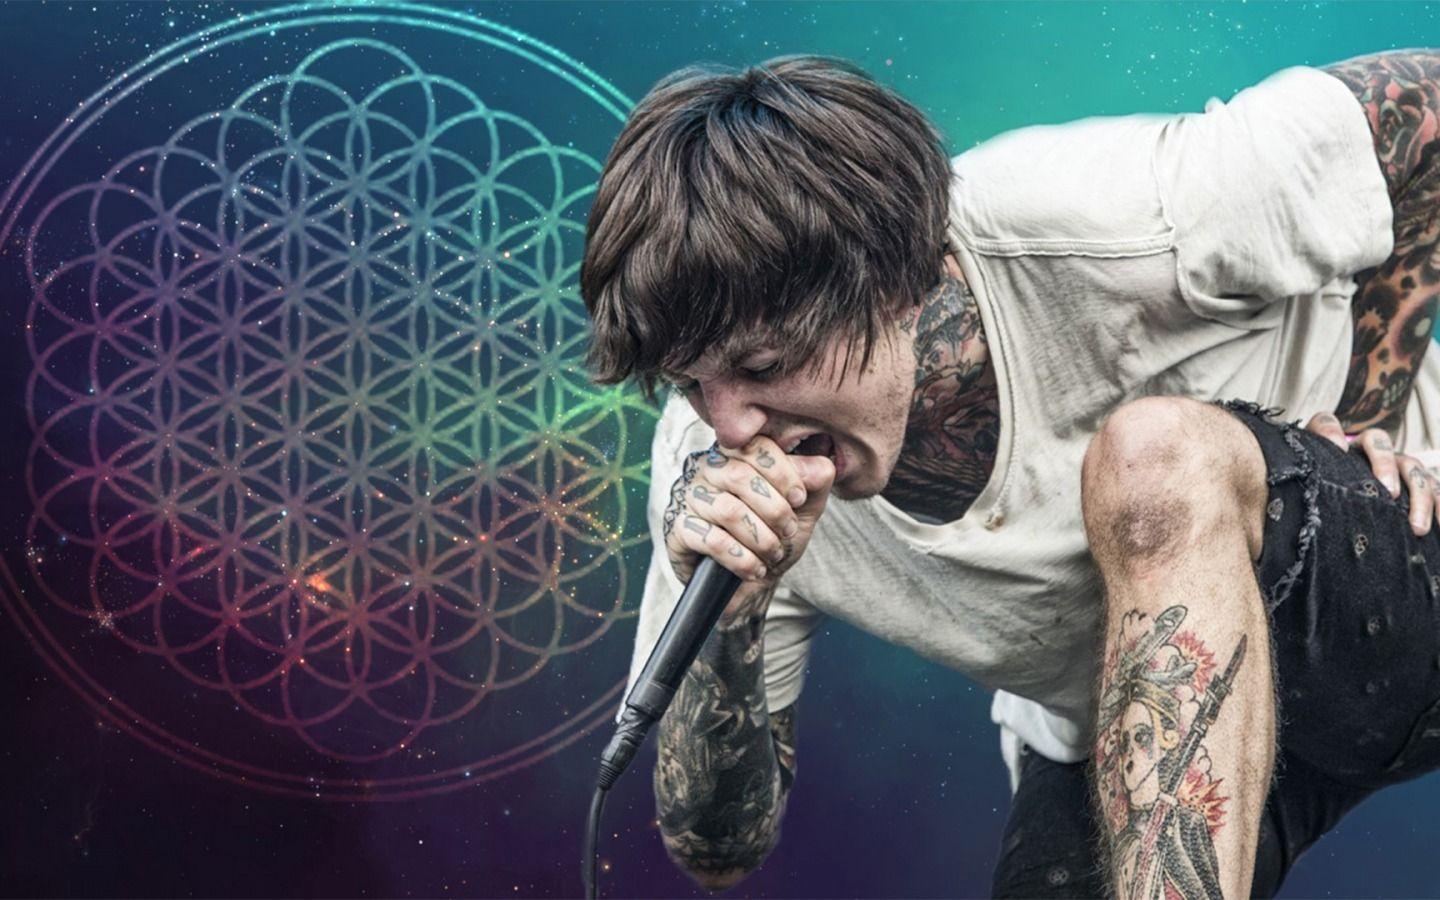 Oliver Sykes Wallpaper (Picture)